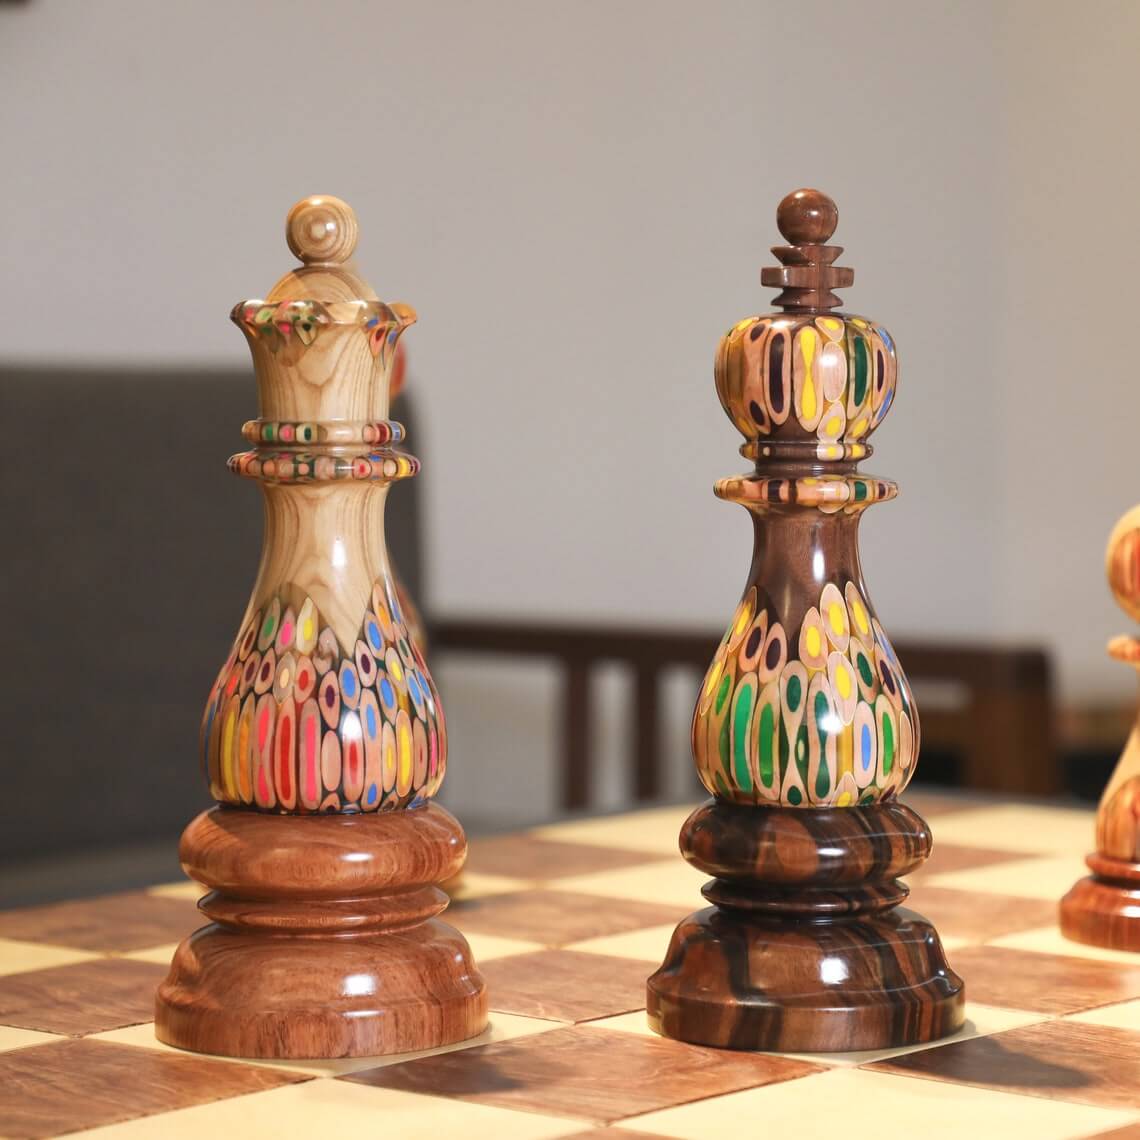 One statue of chess king + queen + rook + bishop +